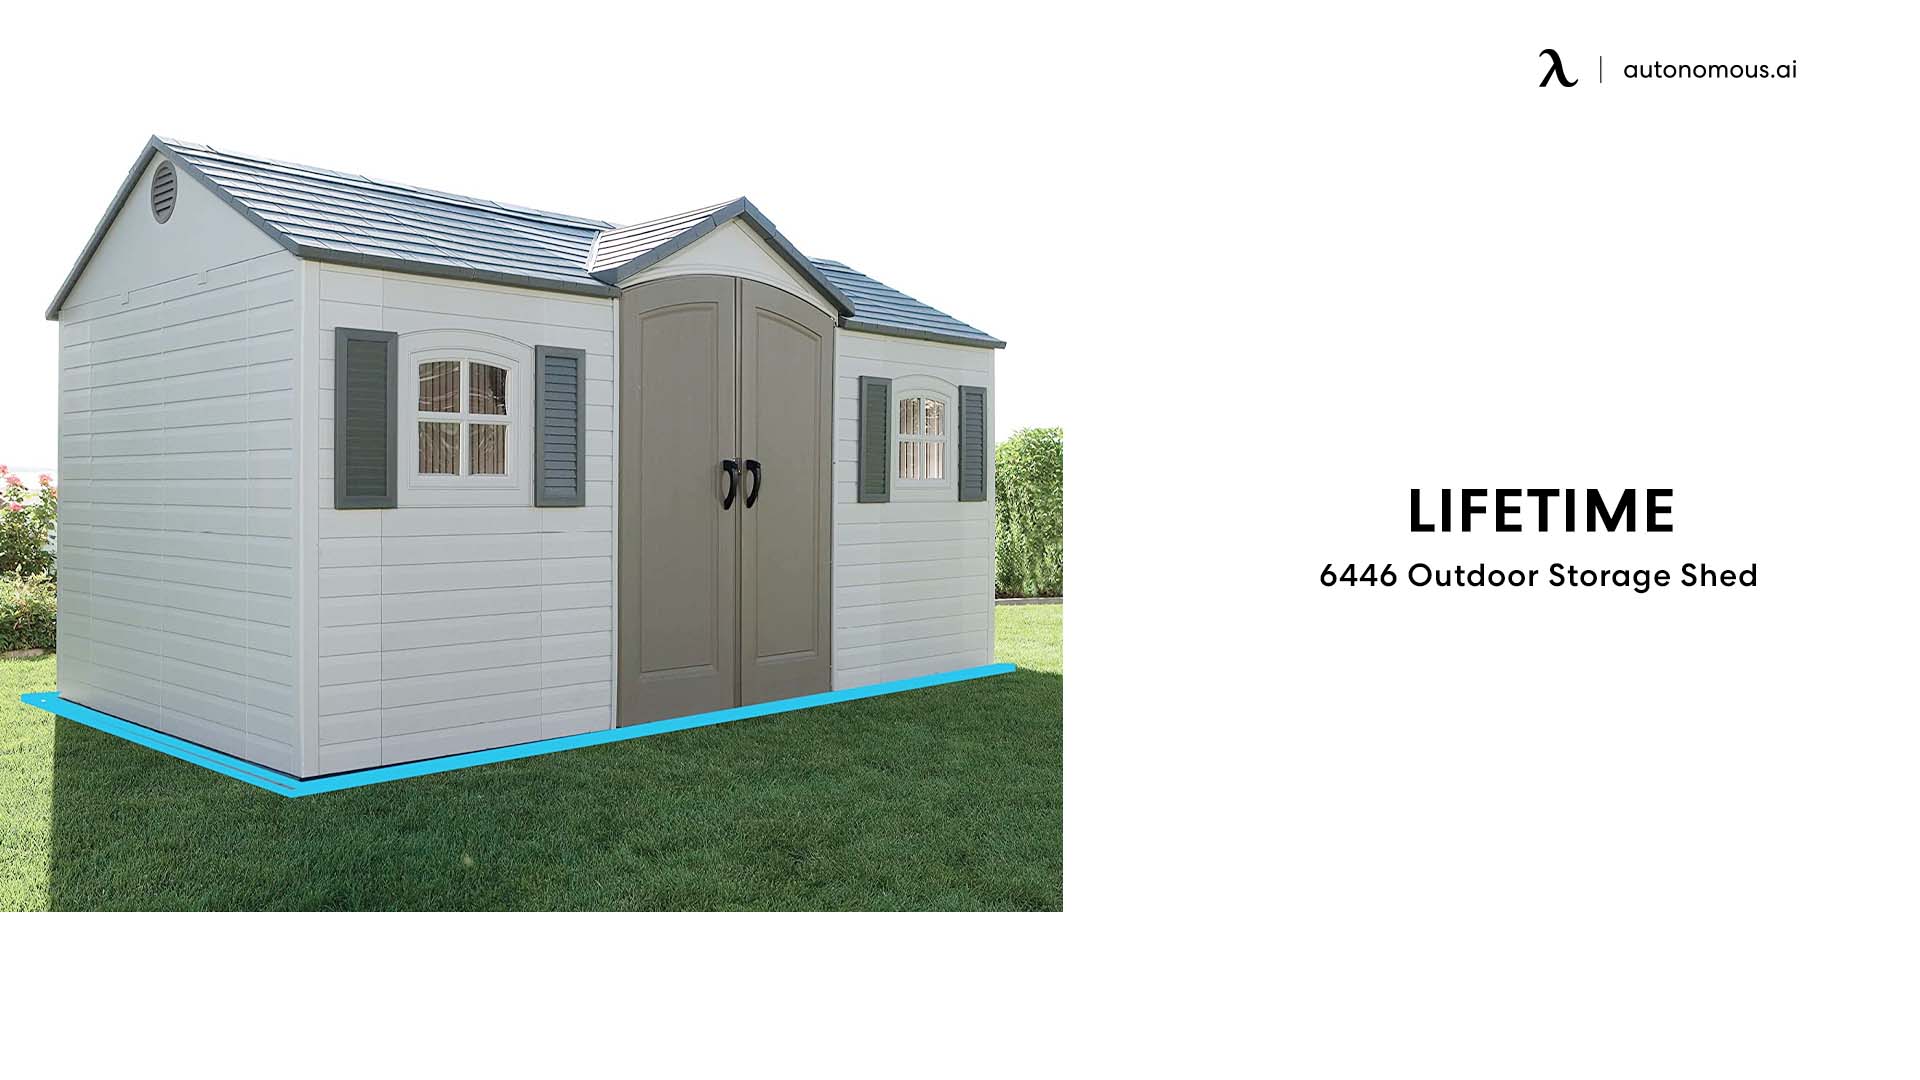 6446 Outdoor Storage Shed from Lifetime